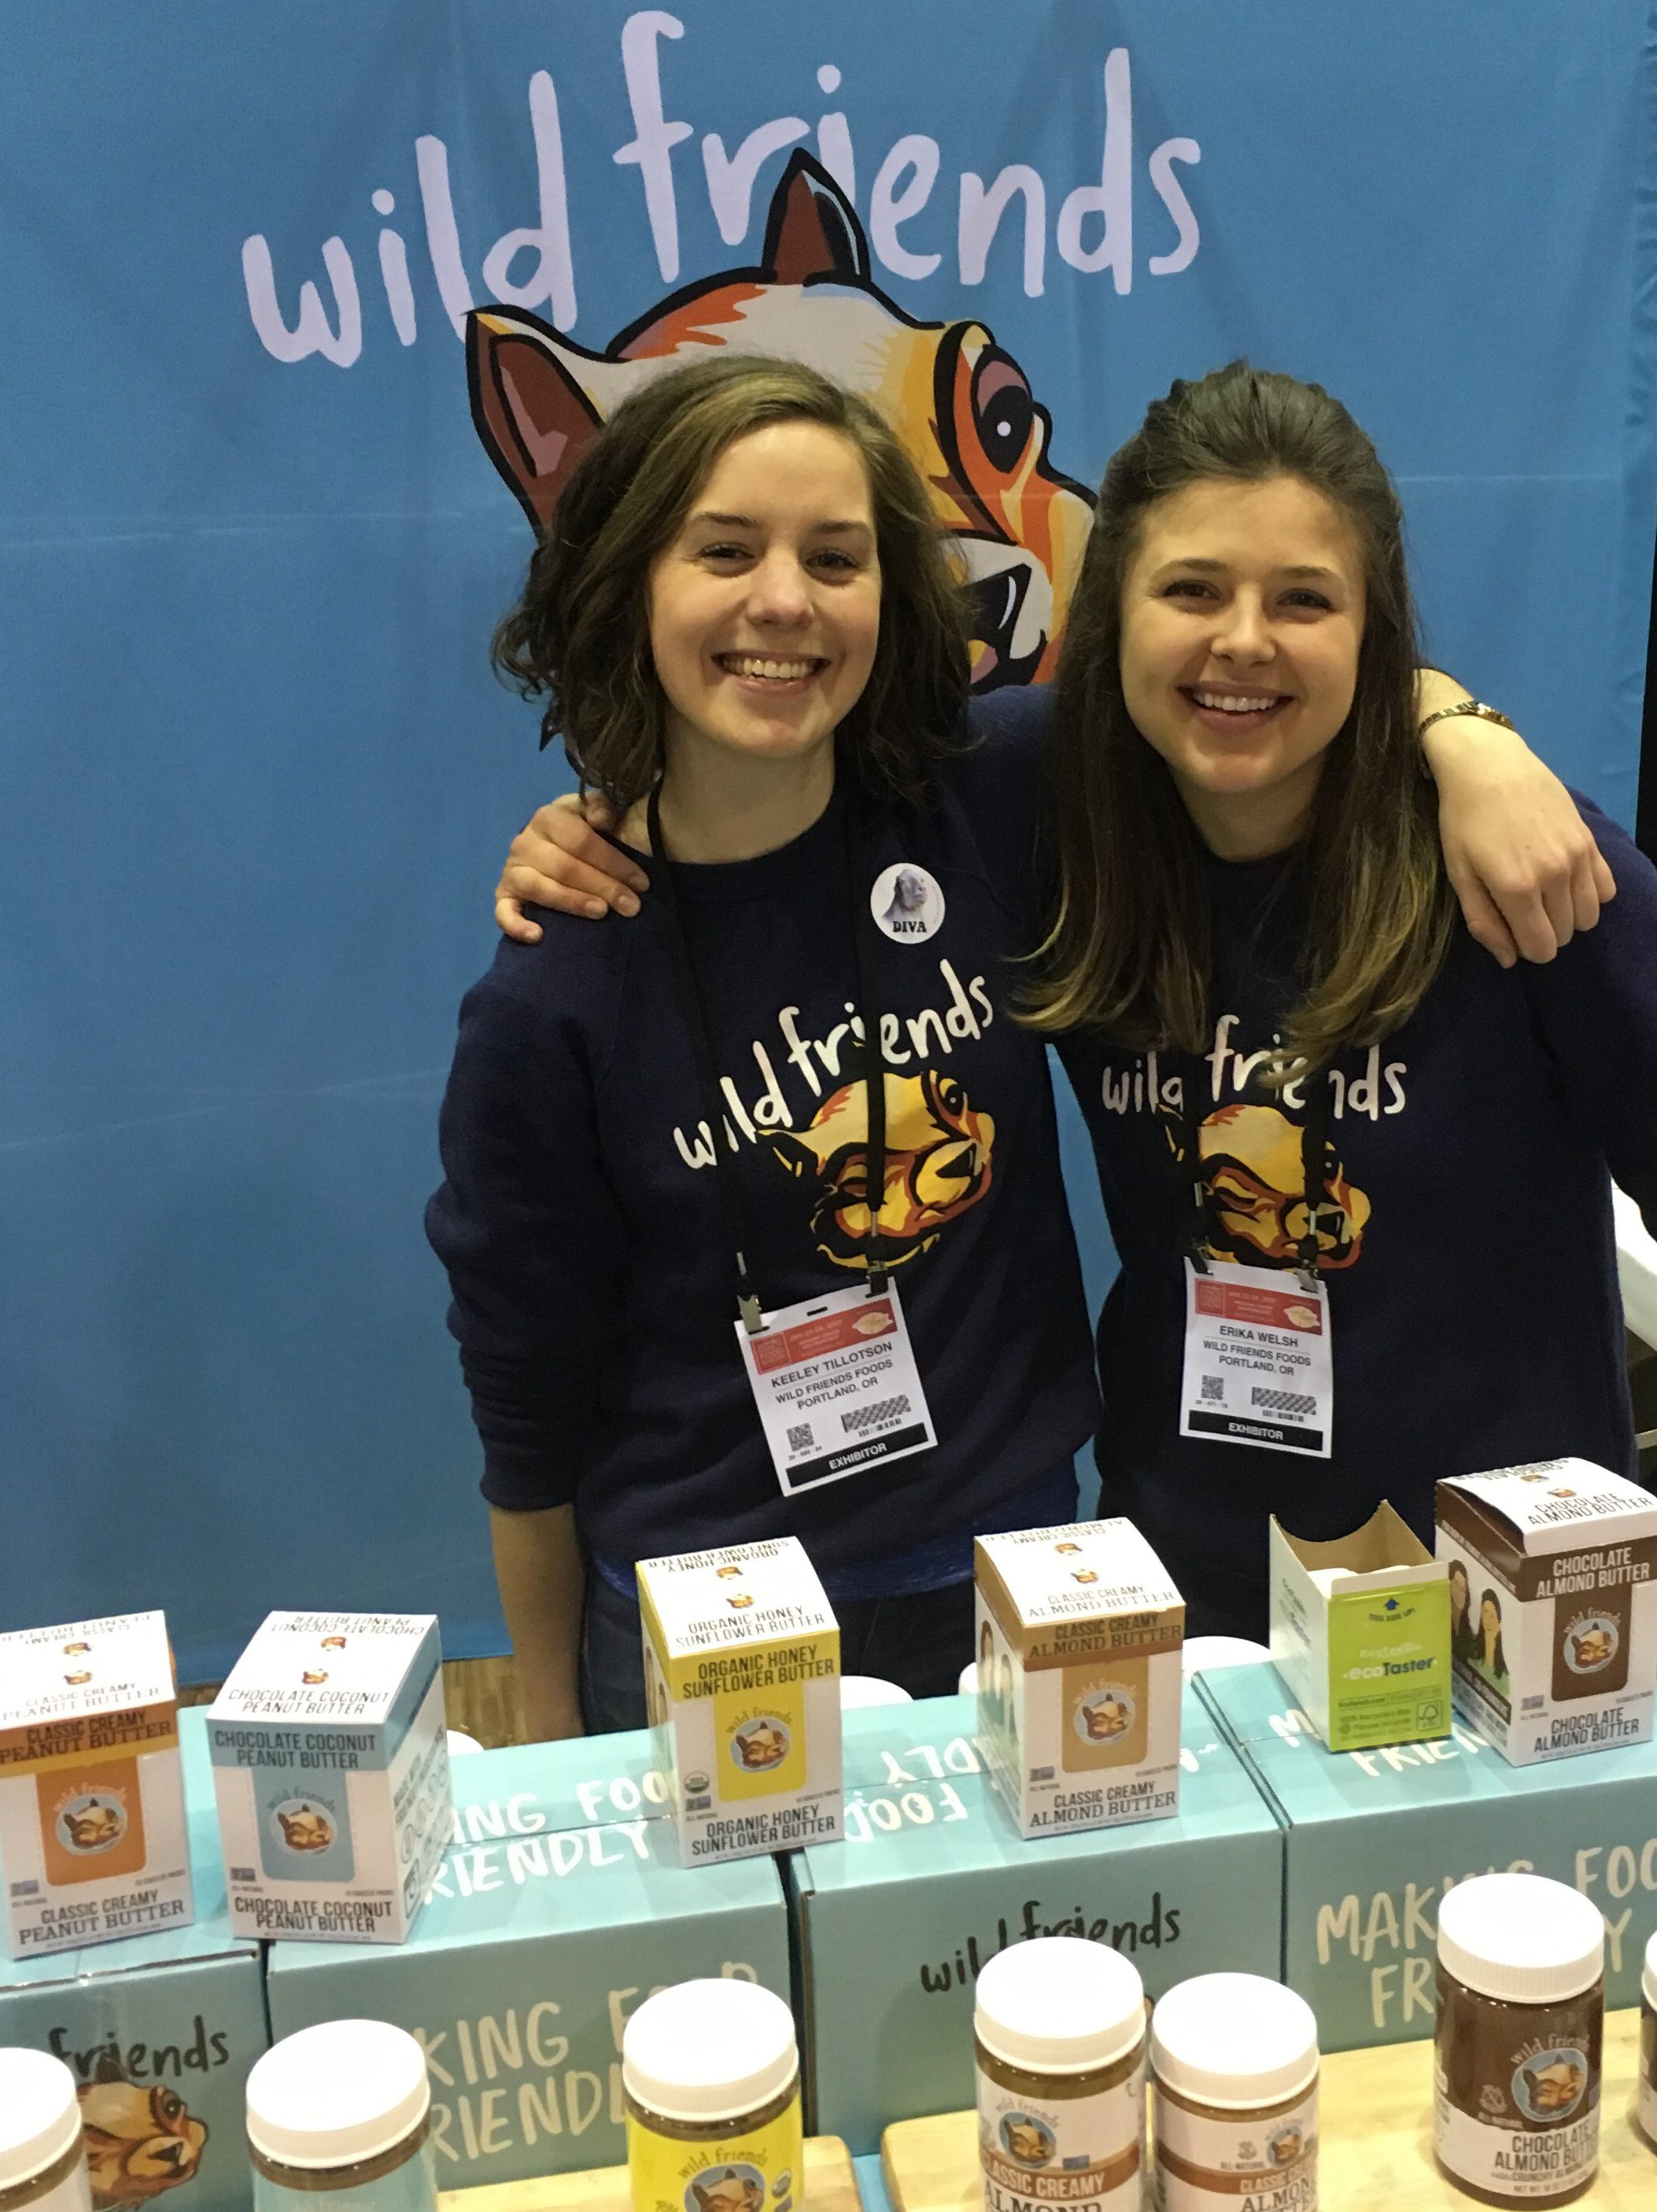 Wild Friends nut butter at the fancy food show in 2017